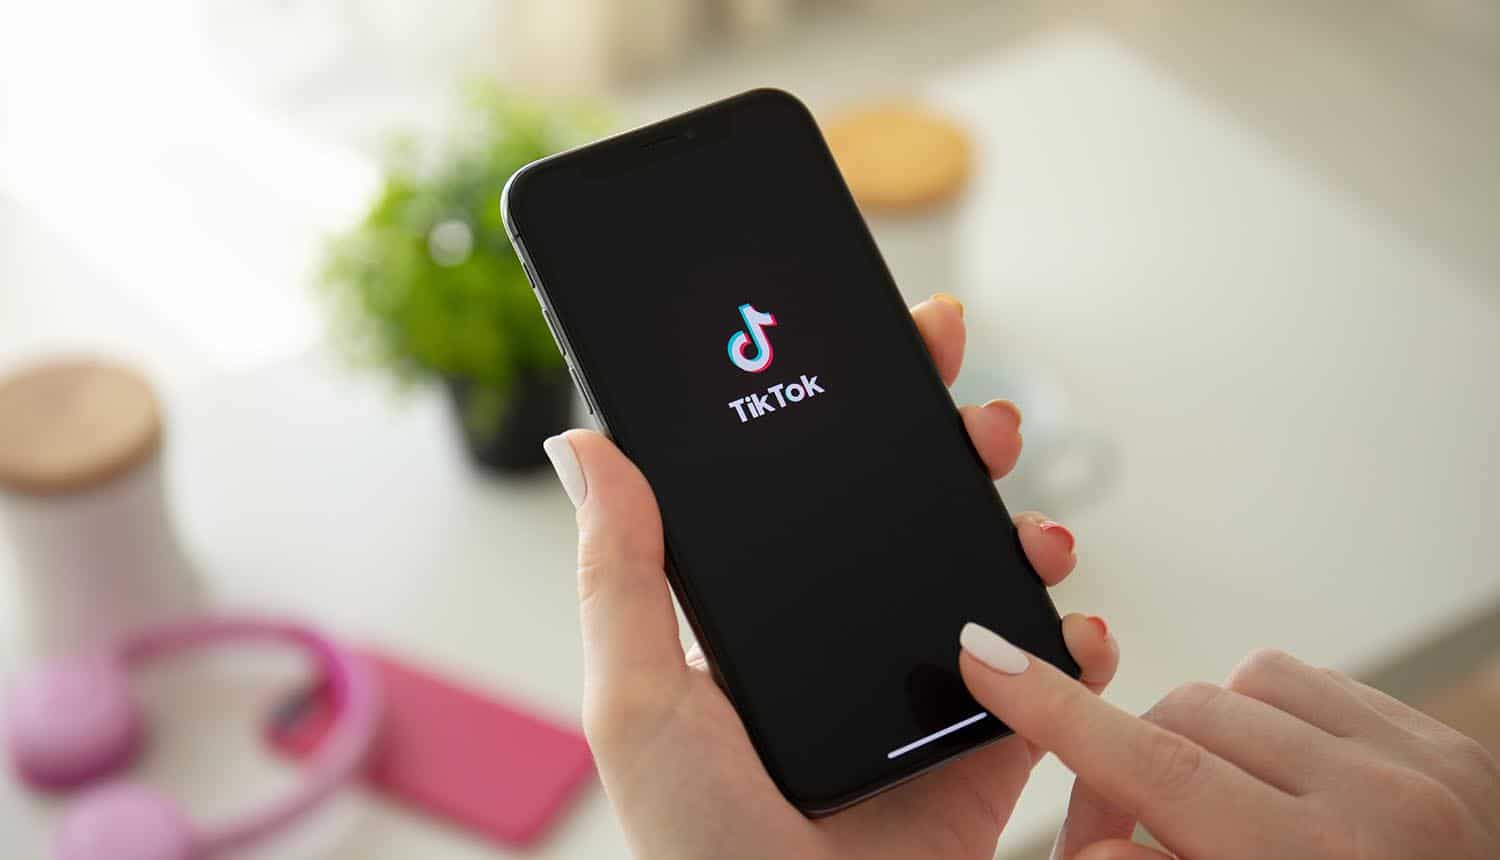 tiktok-security-flaws-may-have-allowed-hackers-to-steal-personal-data_1500